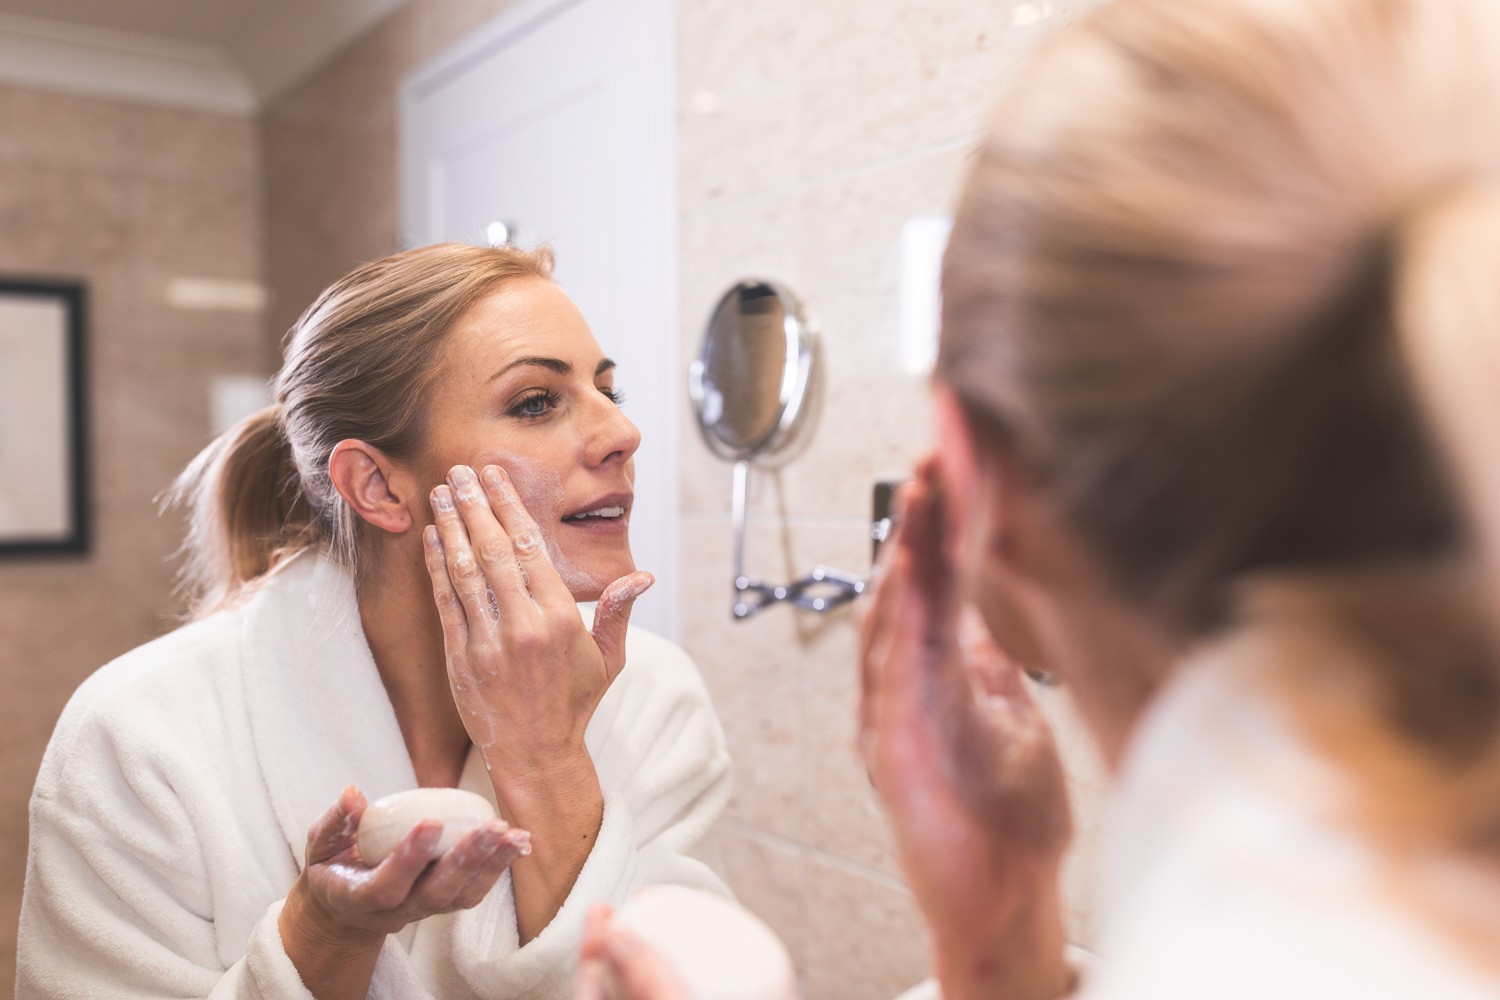 5 ways to modernise skin cleansing and skincare applications